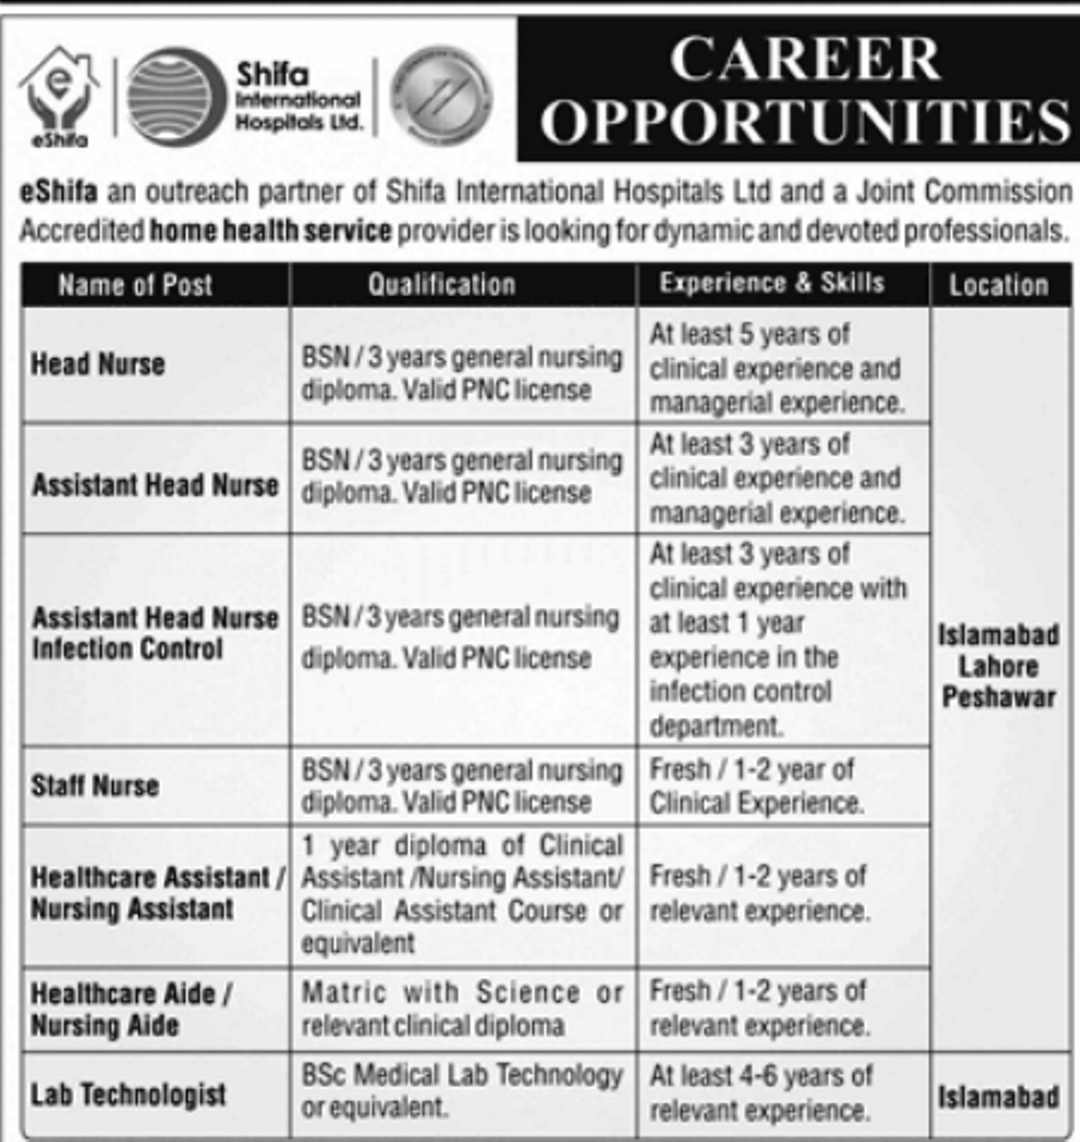 Interested candidates are encouraged to apply for the following positions by September 30, 2023: Head Nurse (Islamabad) Assistant Head Nurse (Lahore) Assistant Head Nurse Infection Control (Peshawar) Staff Nurse (Islamabad) Healthcare Assistant/Nursing Assistant/Nursing Aide (Lahore) Lab Technologist (Islamabad) Application Process: Candidates can apply through either of the following methods: Email your CV to careers@eshifa.org. Please mention the position you are applying for in the subject line. Submit your CV/resume in person to the HR department at the eShifa office located at Plot No. 17 and 18, 2nd Floor, EOBI Building, 1-8 Markaz, Islamabad. Join eShifa and enjoy the following benefits: Competitive salary packages Attractive benefits eShifa is proud to be an equal opportunity employer, and we welcome candidates from all backgrounds to apply. For inquiries, please contact us at 051-8901104 or visit our website at www.eshifa.org. Join us in making a positive impact on healthcare!